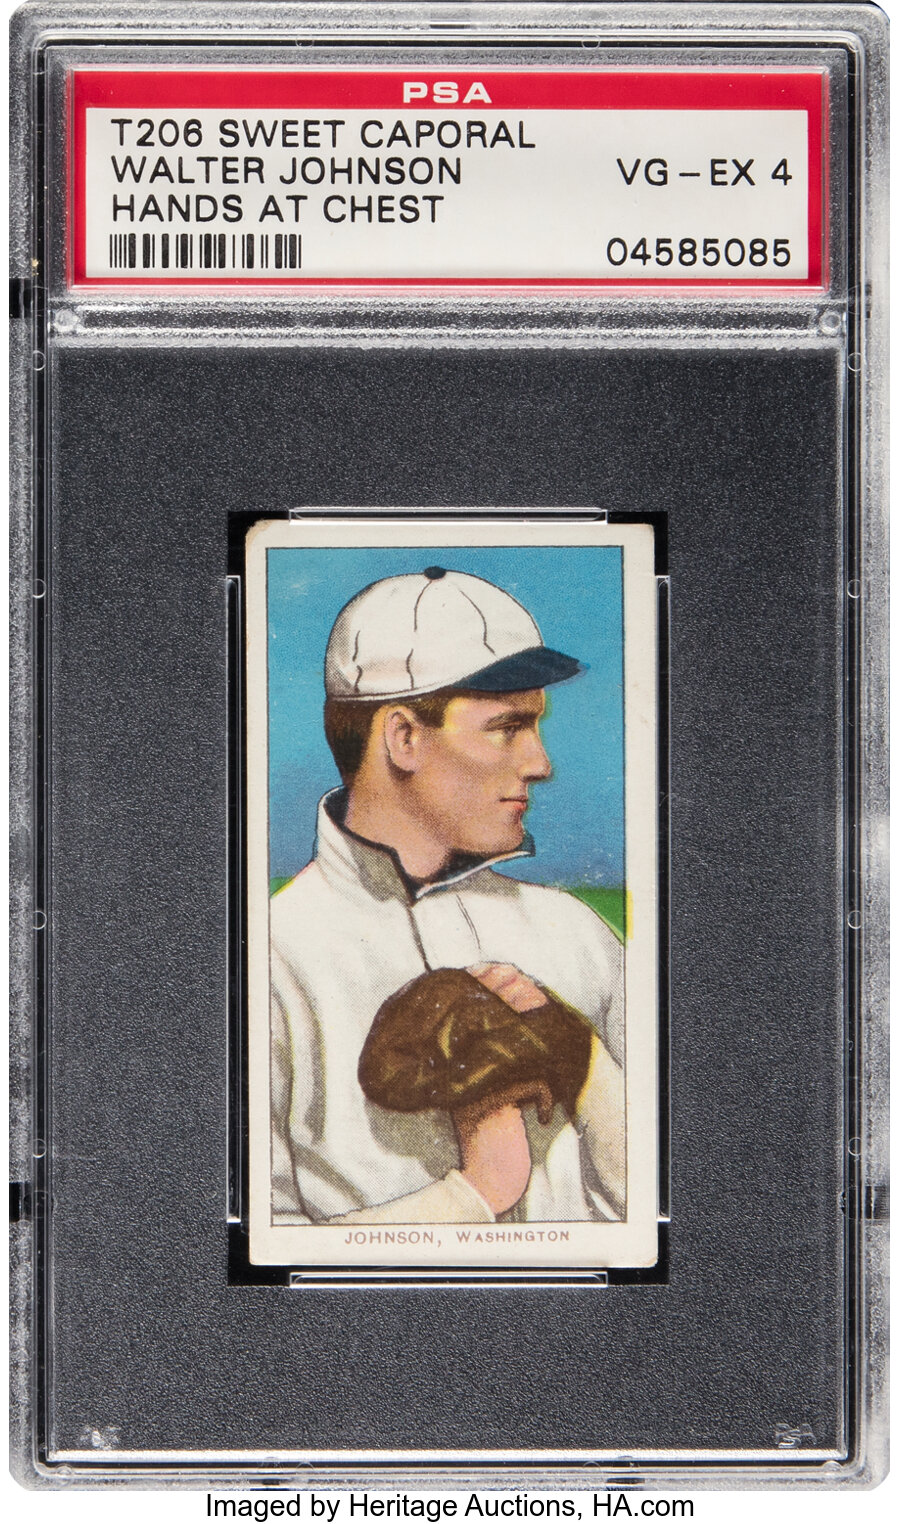 1909-11 T206 Sweet Caporal Walter Johnson (Hands At Chest) PSA VG-EX 4